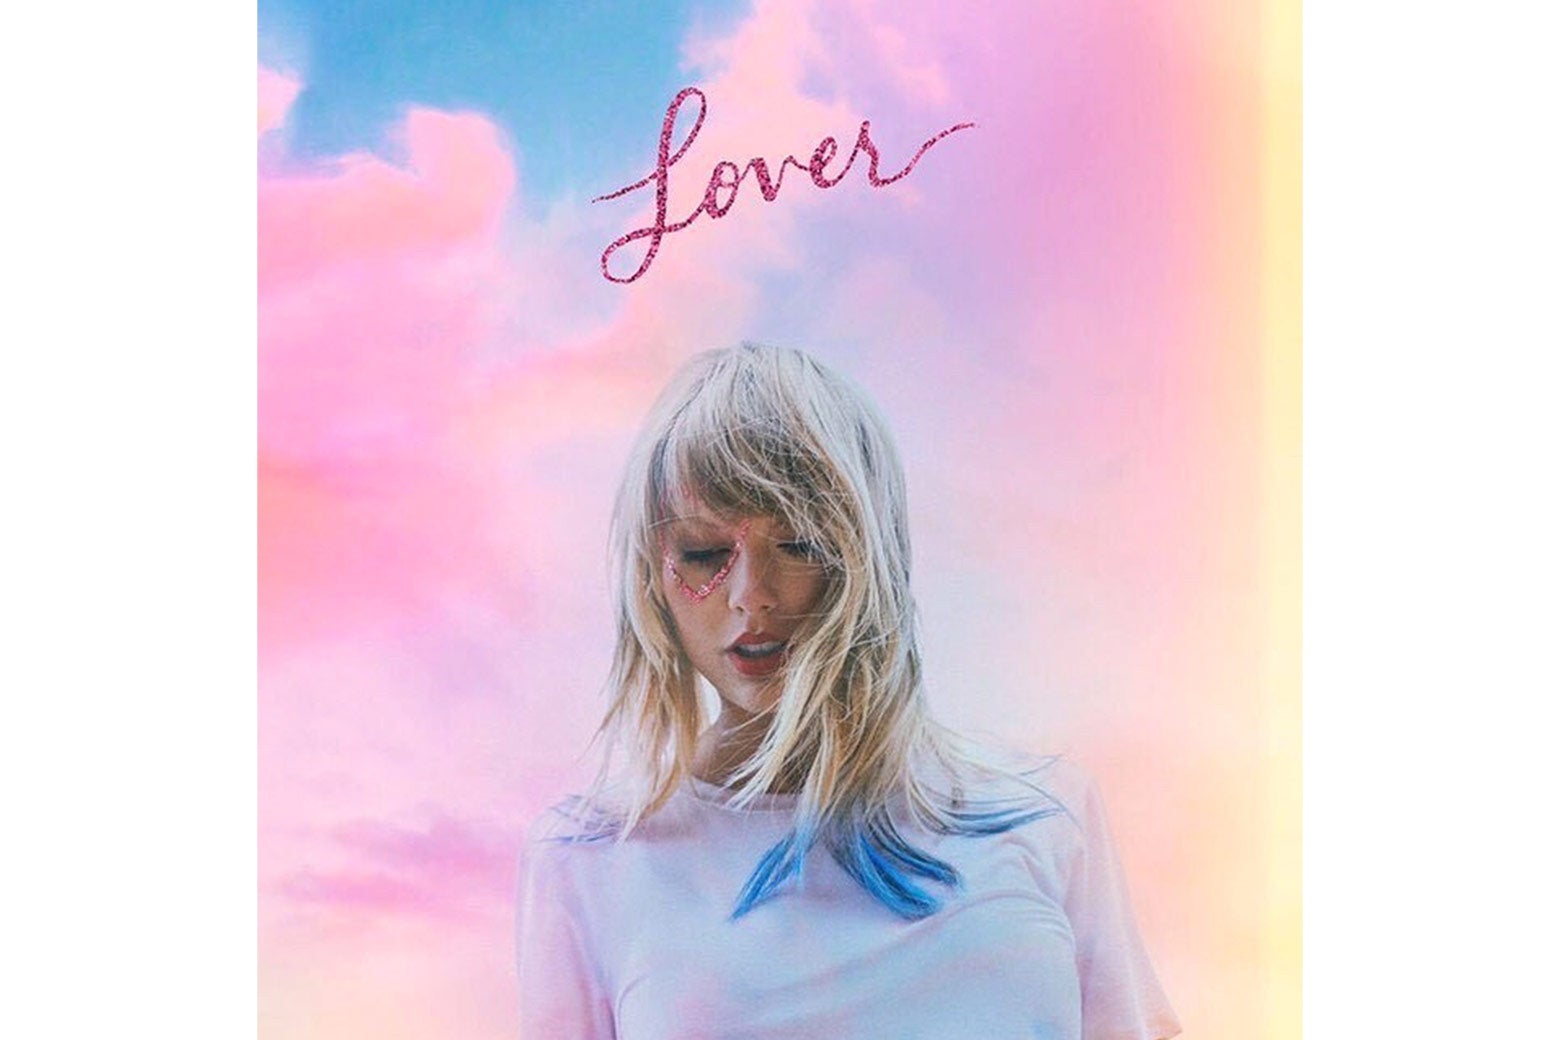 Taylor Swifts new album Lover